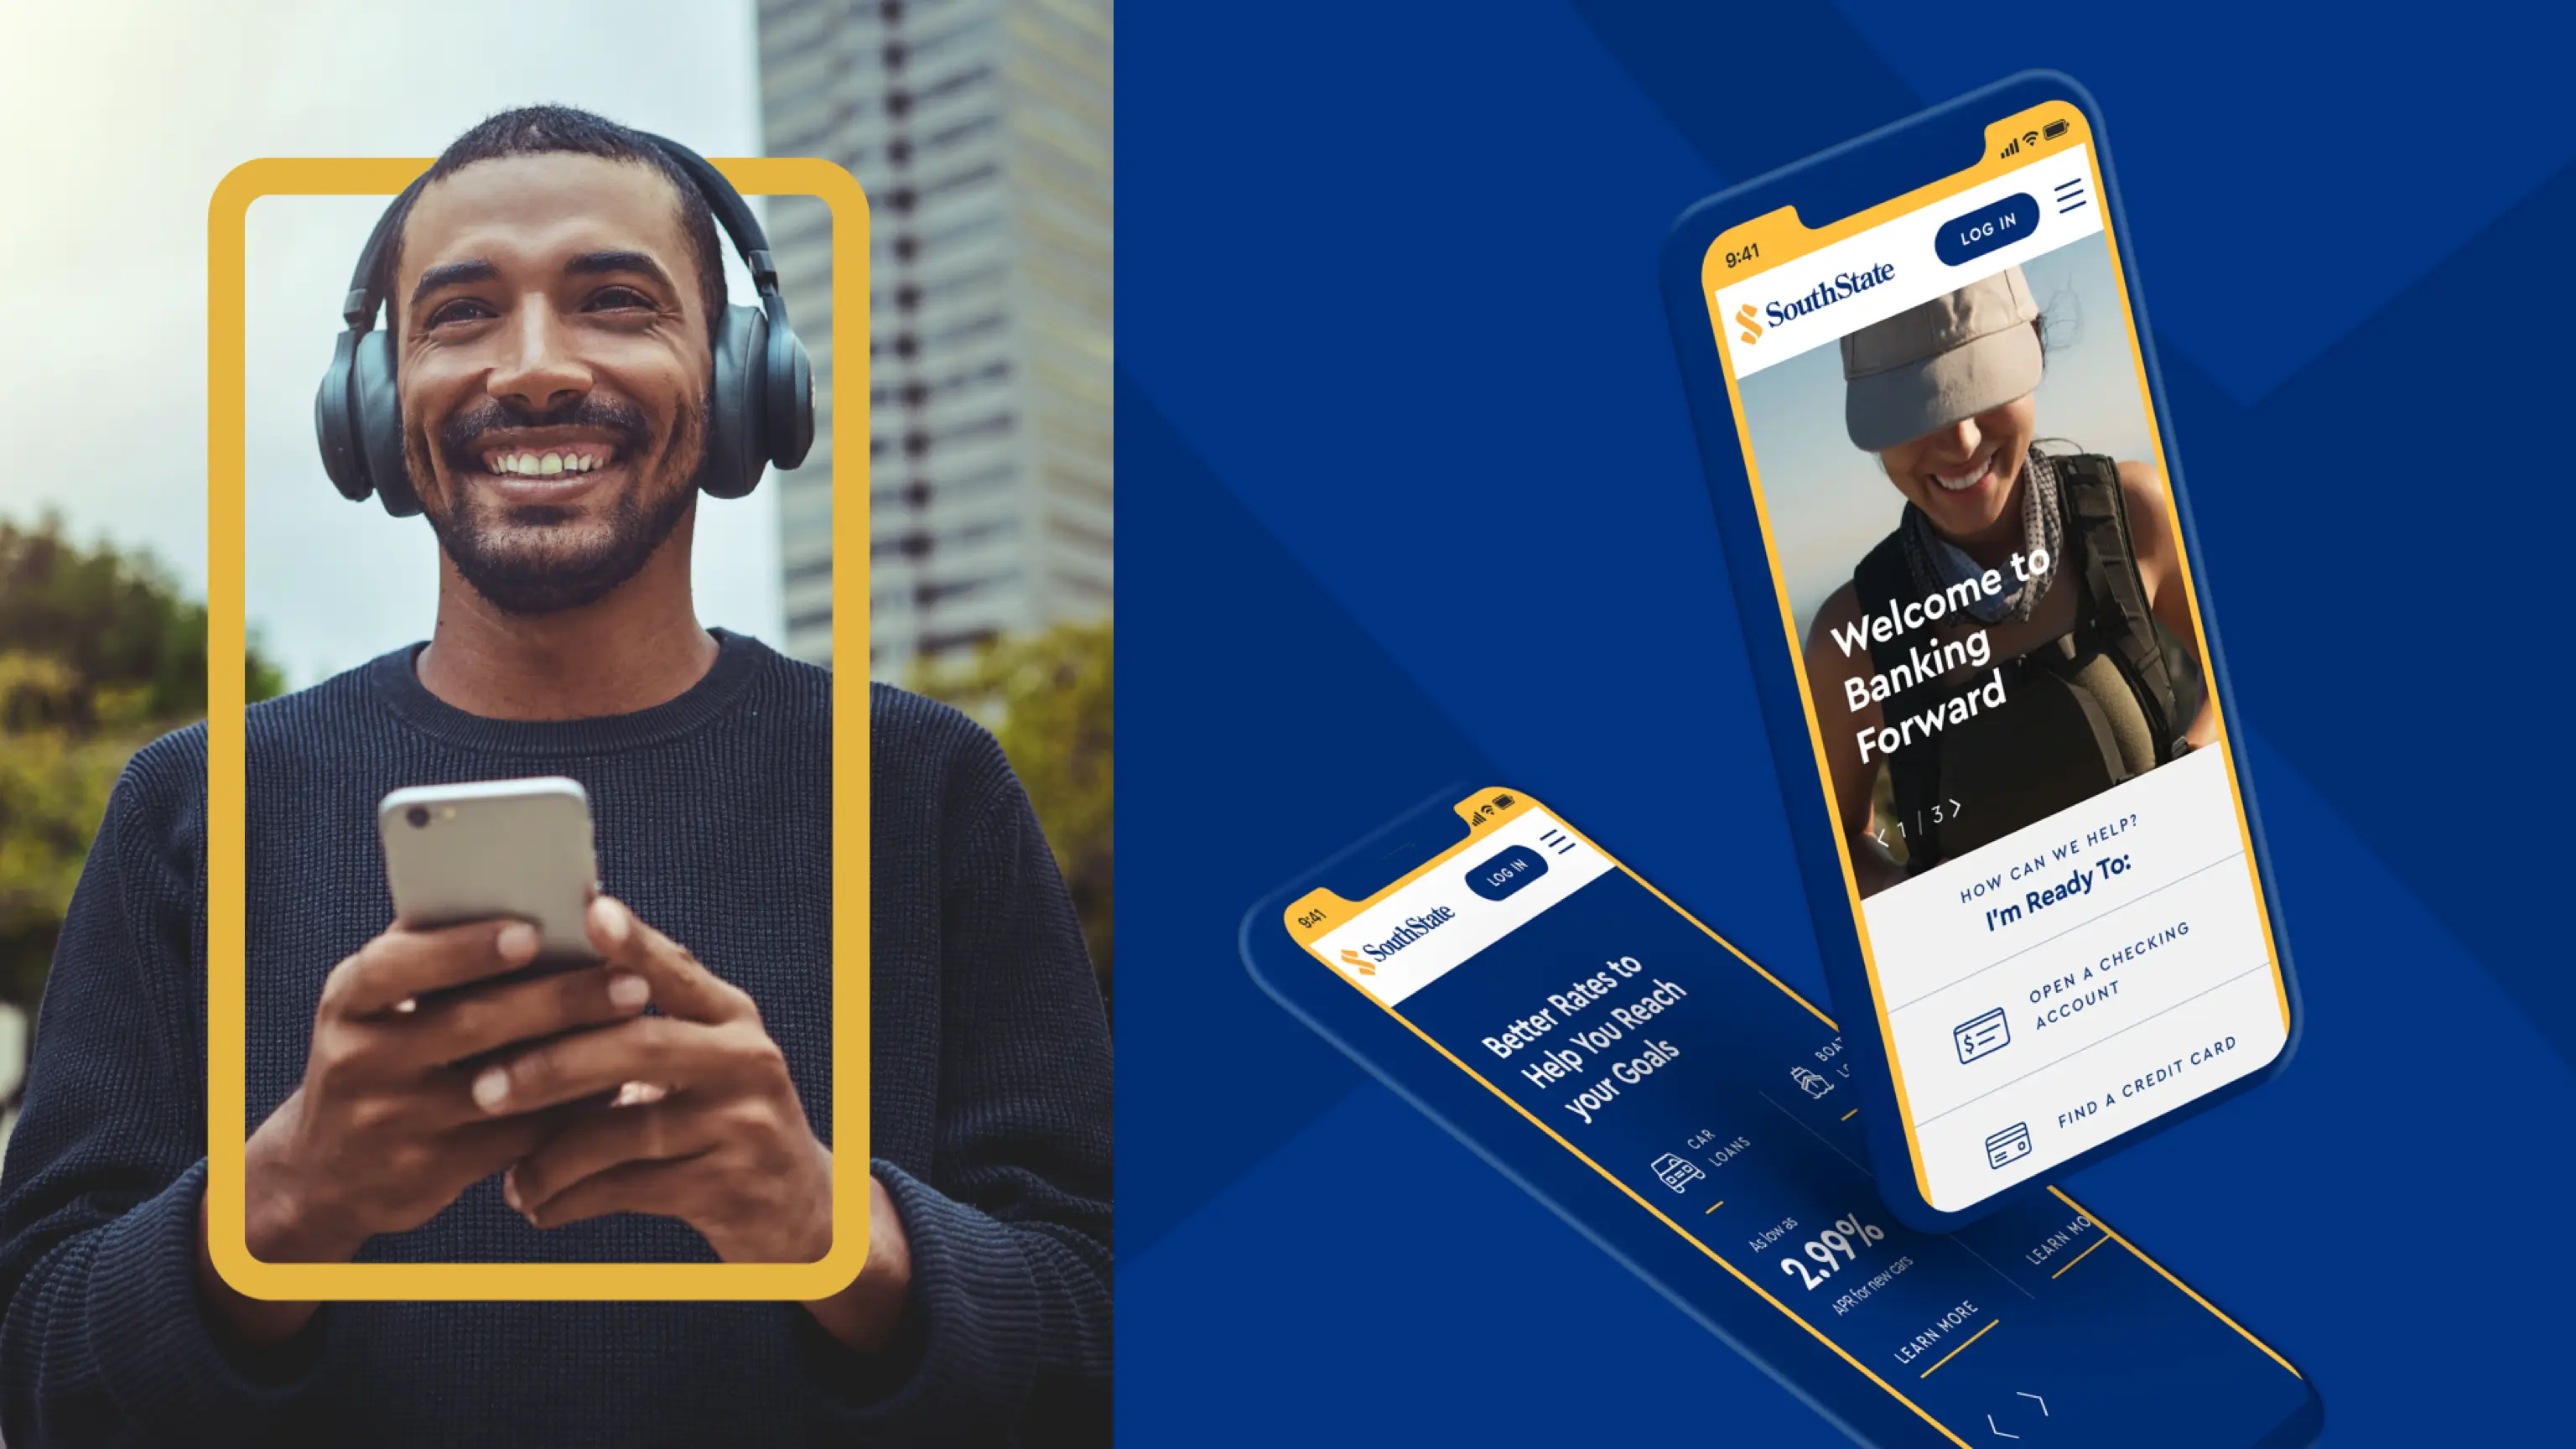 SouthState Bank digital first approach hero image with man on phone and mobile app.